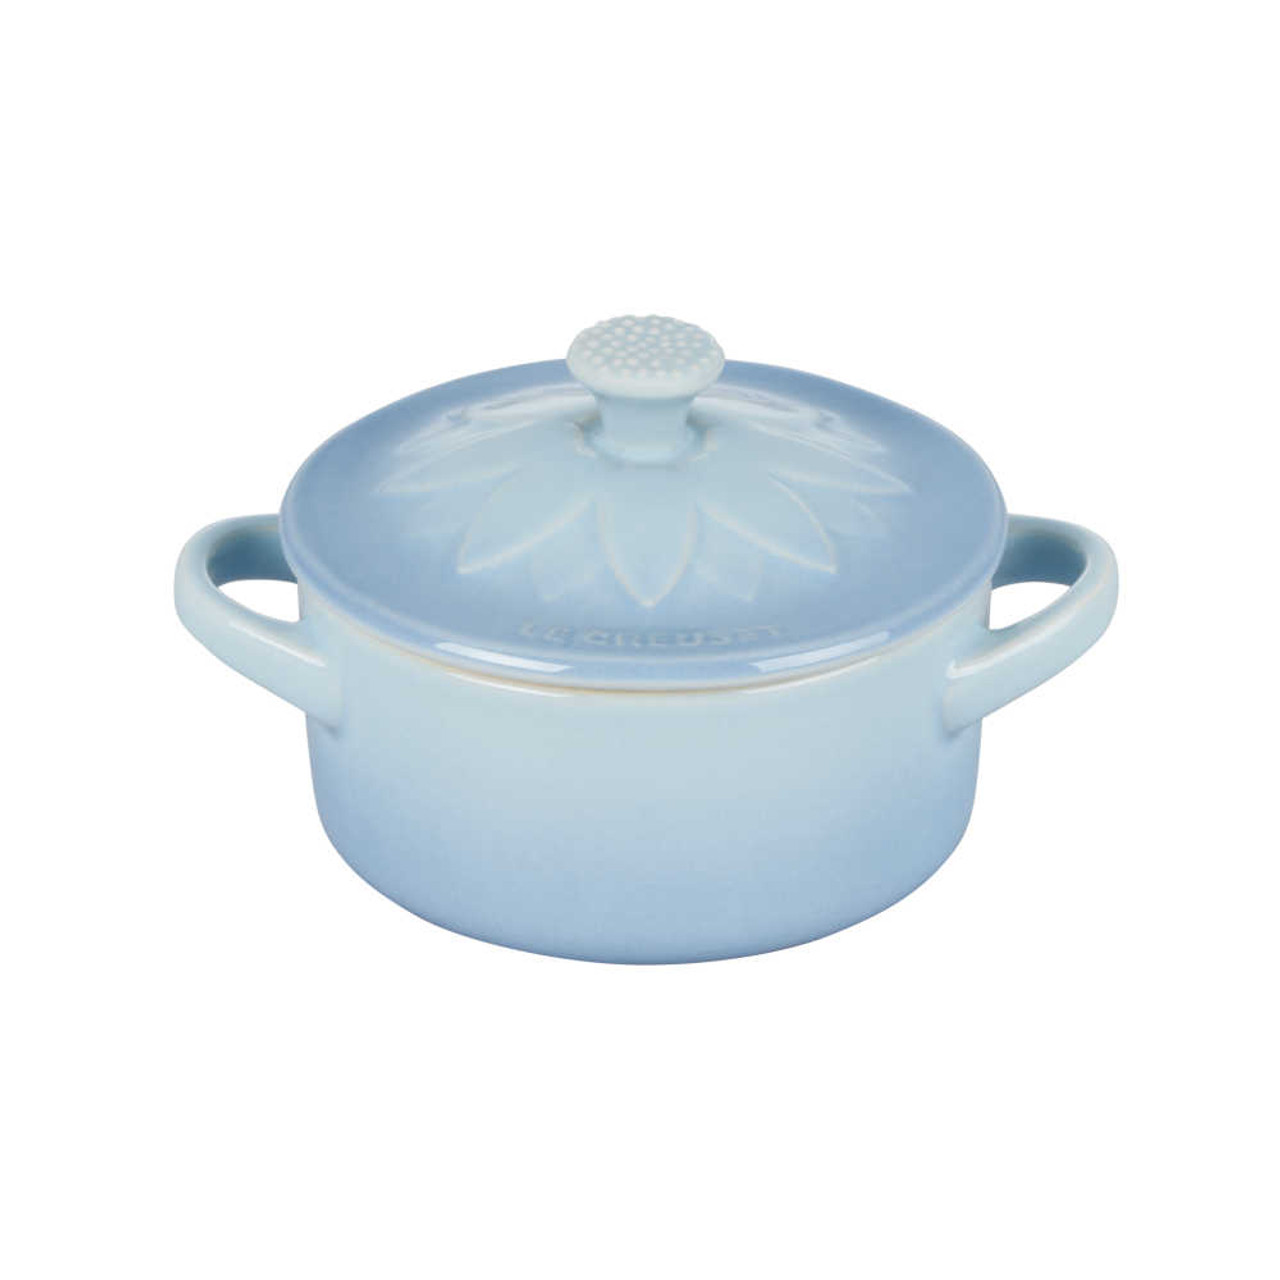 https://cdn11.bigcommerce.com/s-hccytny0od/images/stencil/1280x1280/products/5333/23196/Le_Creuset_Mini_Cocotte_With_Flower_Lid_in_Coastal_Blue__59289.1680014215.jpg?c=2?imbypass=on